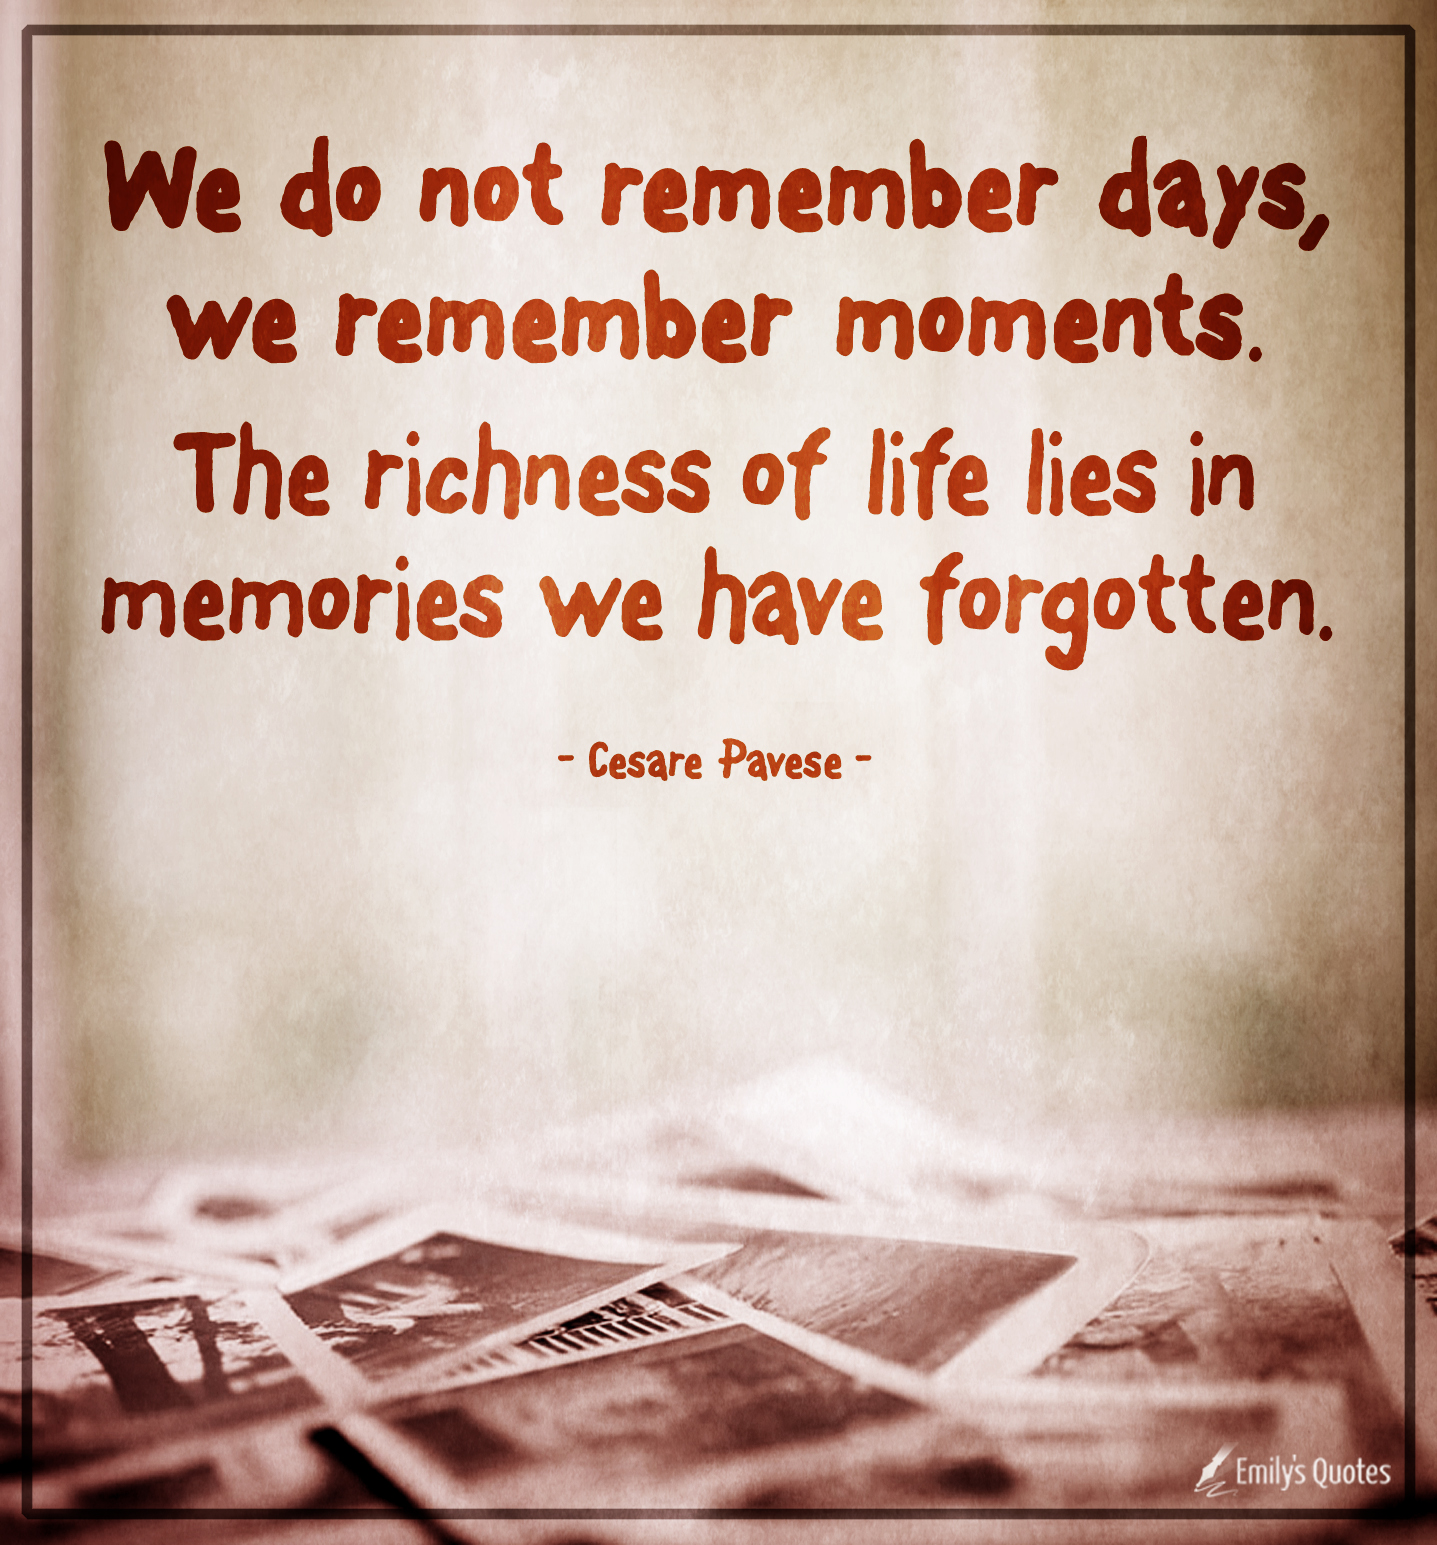 The day we remember. Remember the moment. We do not remember Days. We do not remember Days, we remember moments. Remember picture.